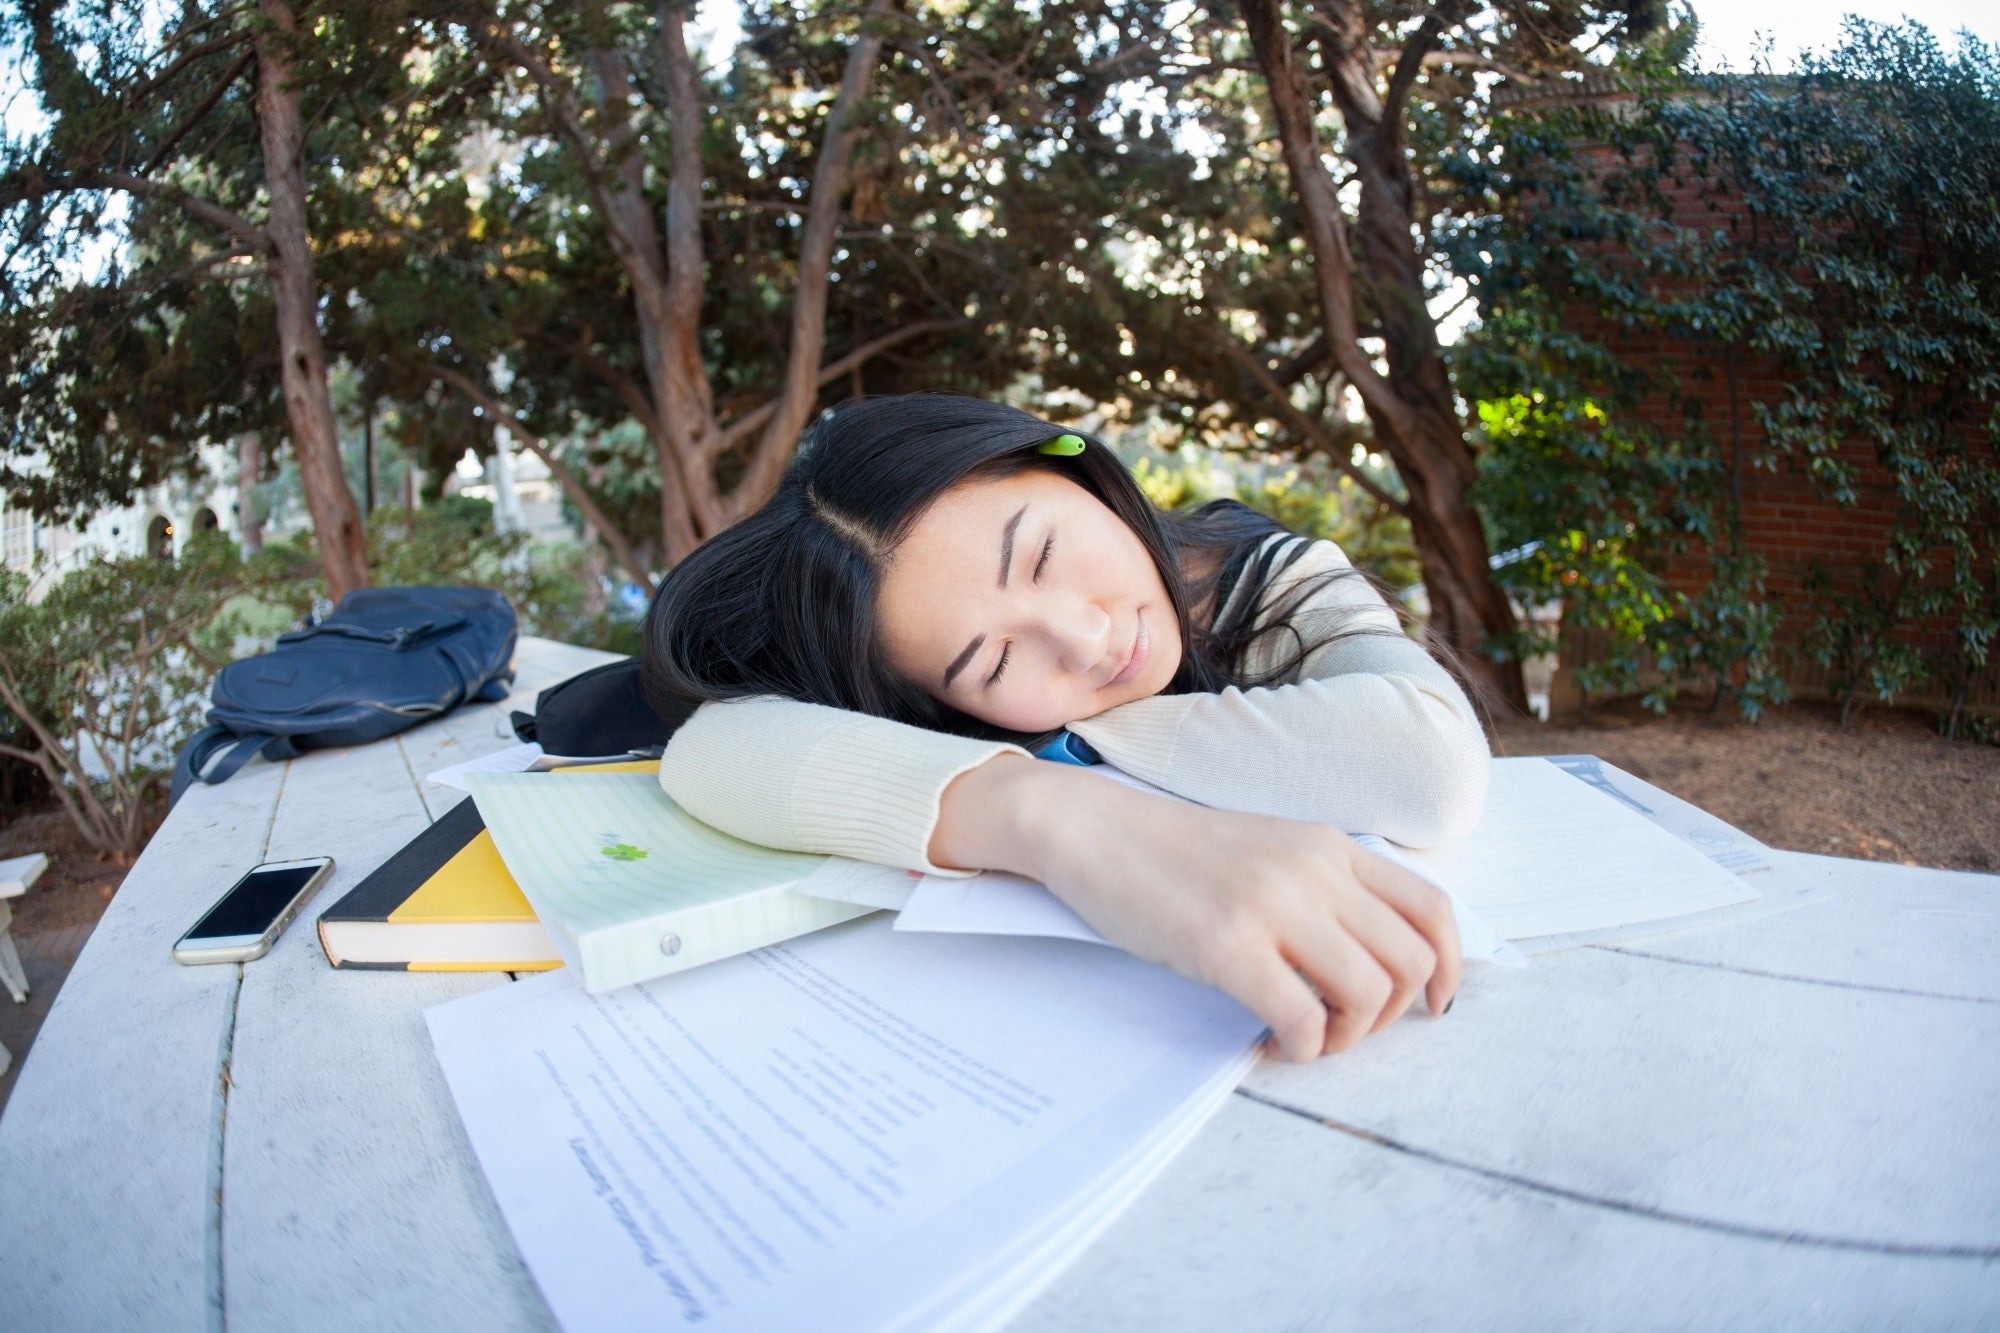 No More Z's During Class: 9 Useful Tips for Tired Students in College